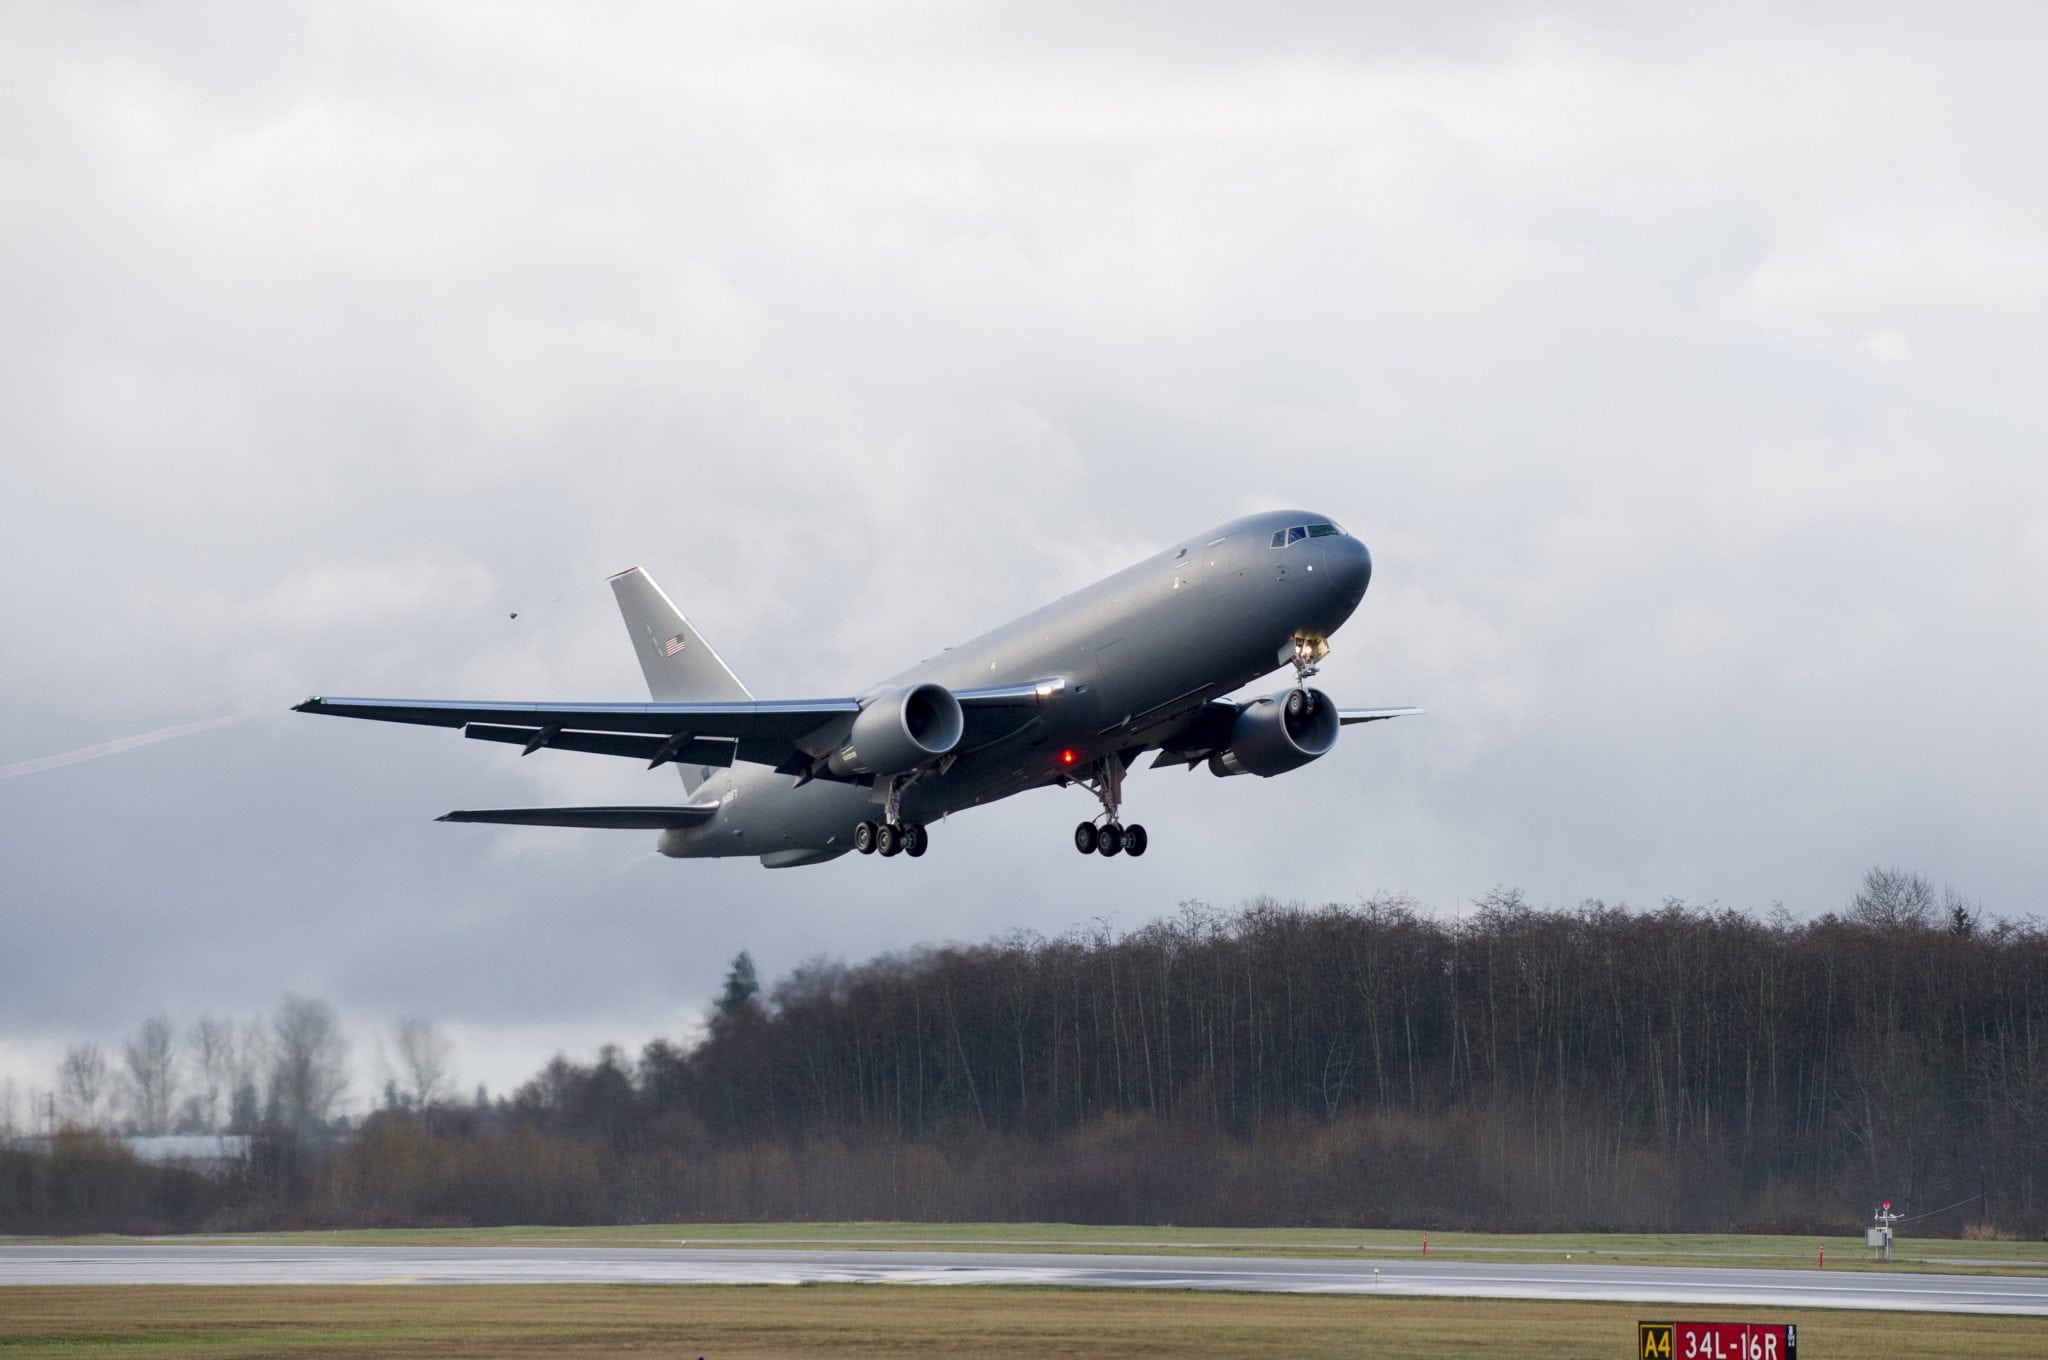 Boeing 767-2C takes off from Paine Field, Wash.